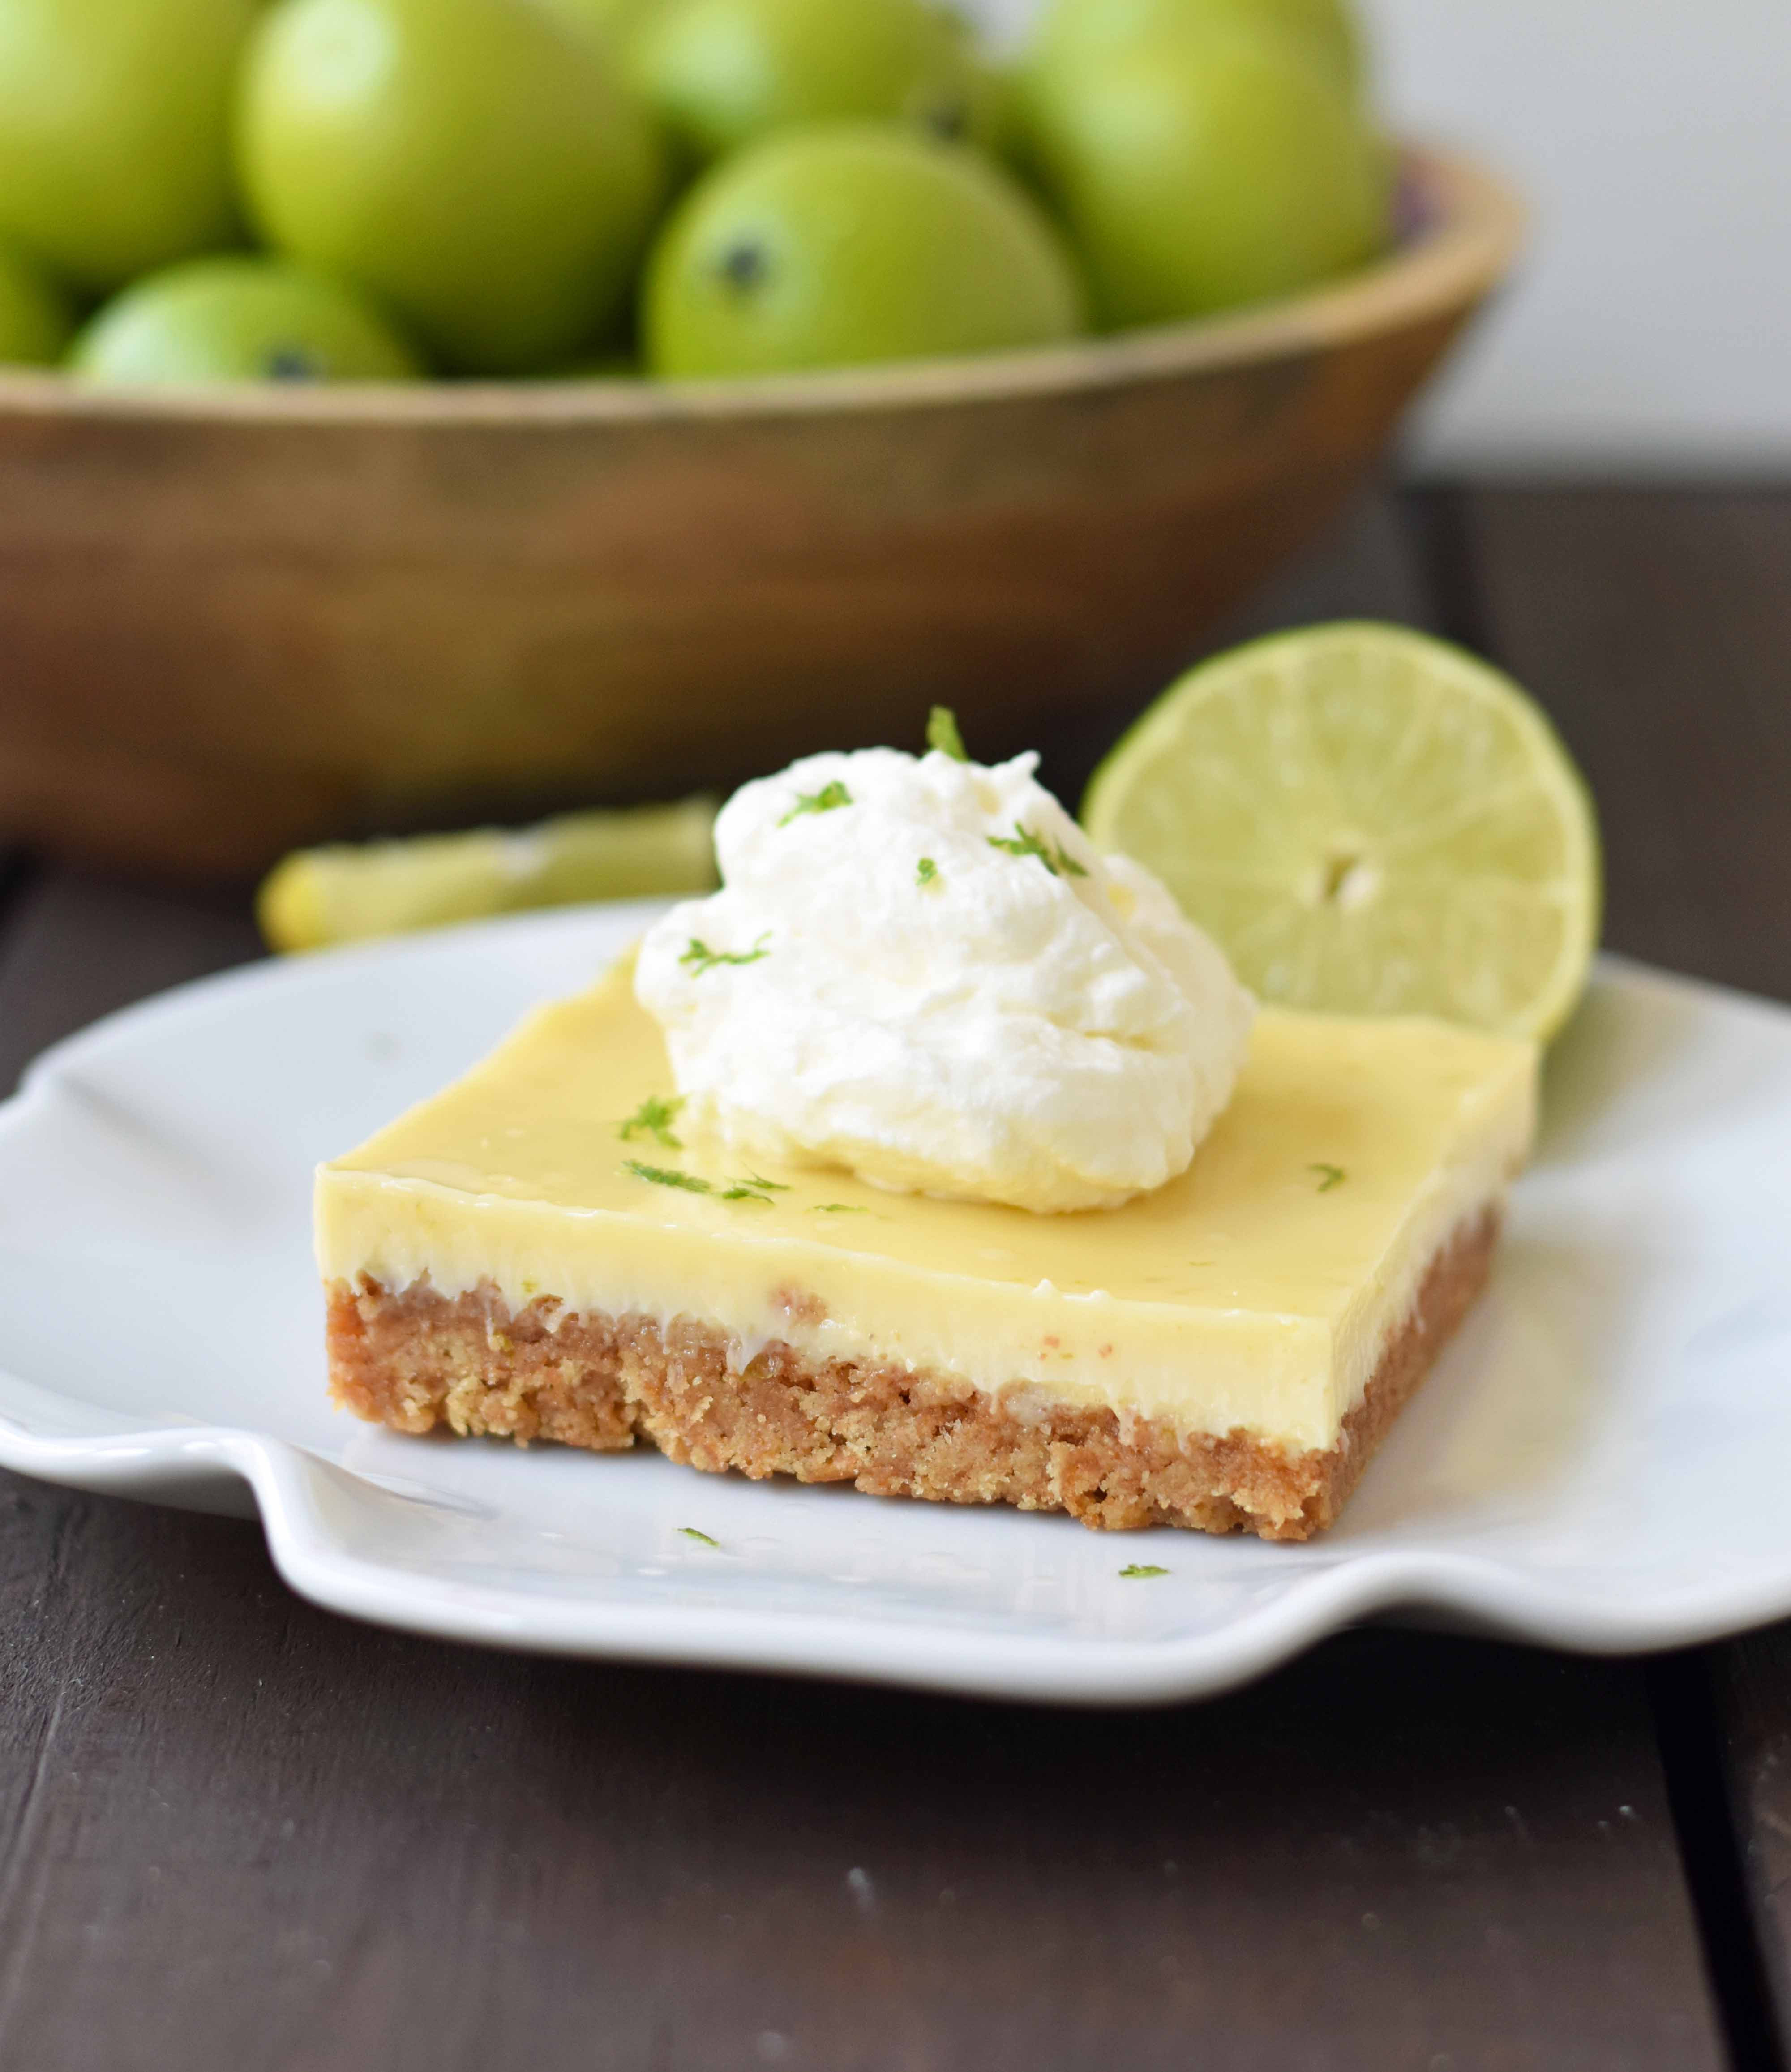 Key Lime Cream Pie Bars made with a buttery graham cracker crust and sweet, tart, and creamy key lime filling and topped with homemade whipped cream. A beautiful and delicious dessert bar recipe. www.modernhoney.com